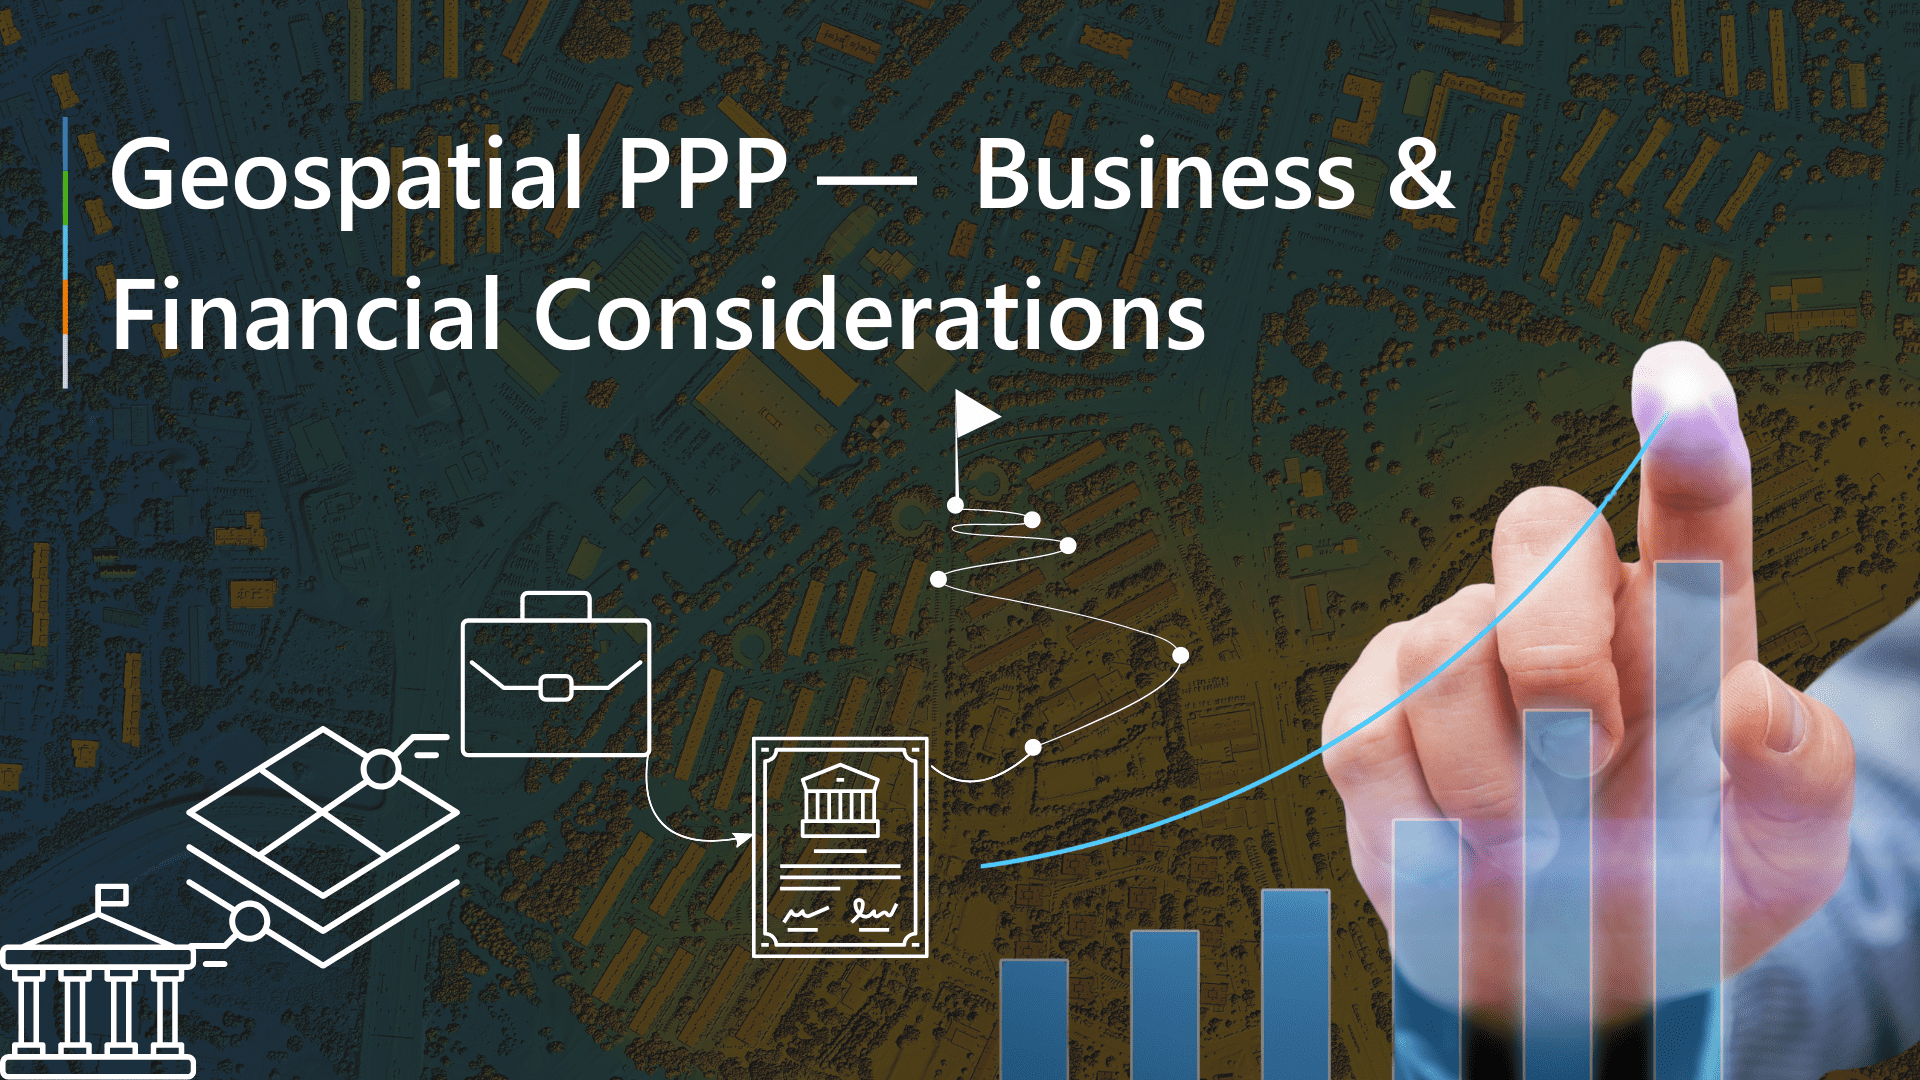 Geospatial-PPP-Business-&-Financial-Considerations-WGIC-Report